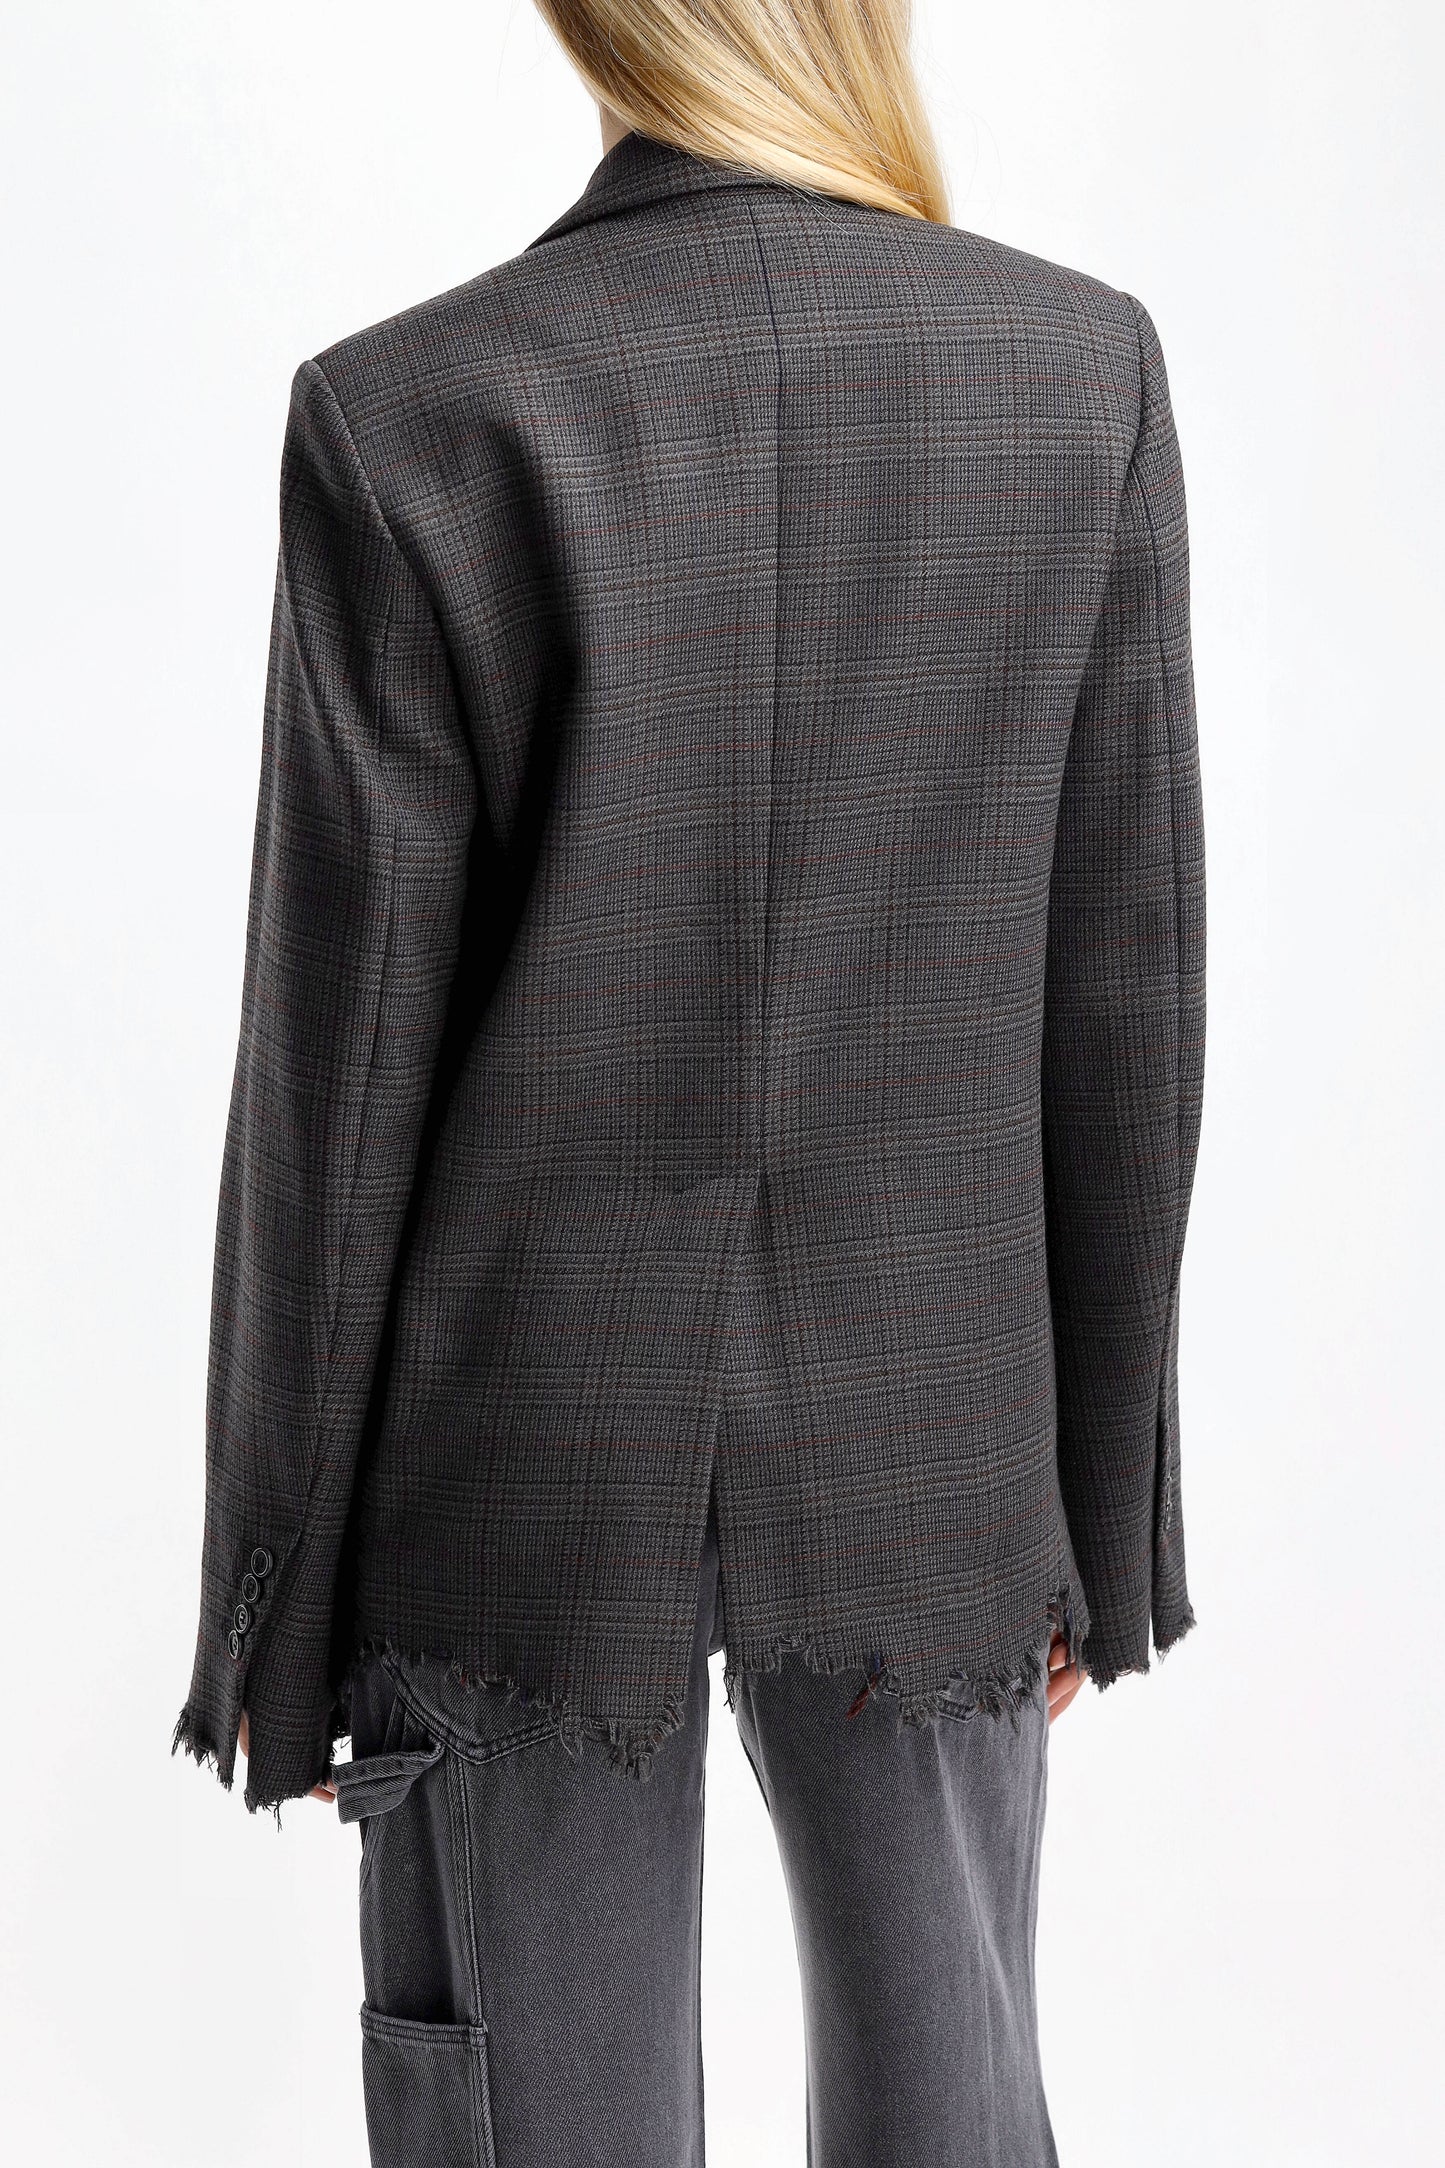 Blazer Distressed in GrauJW Anderson - Anita Hass